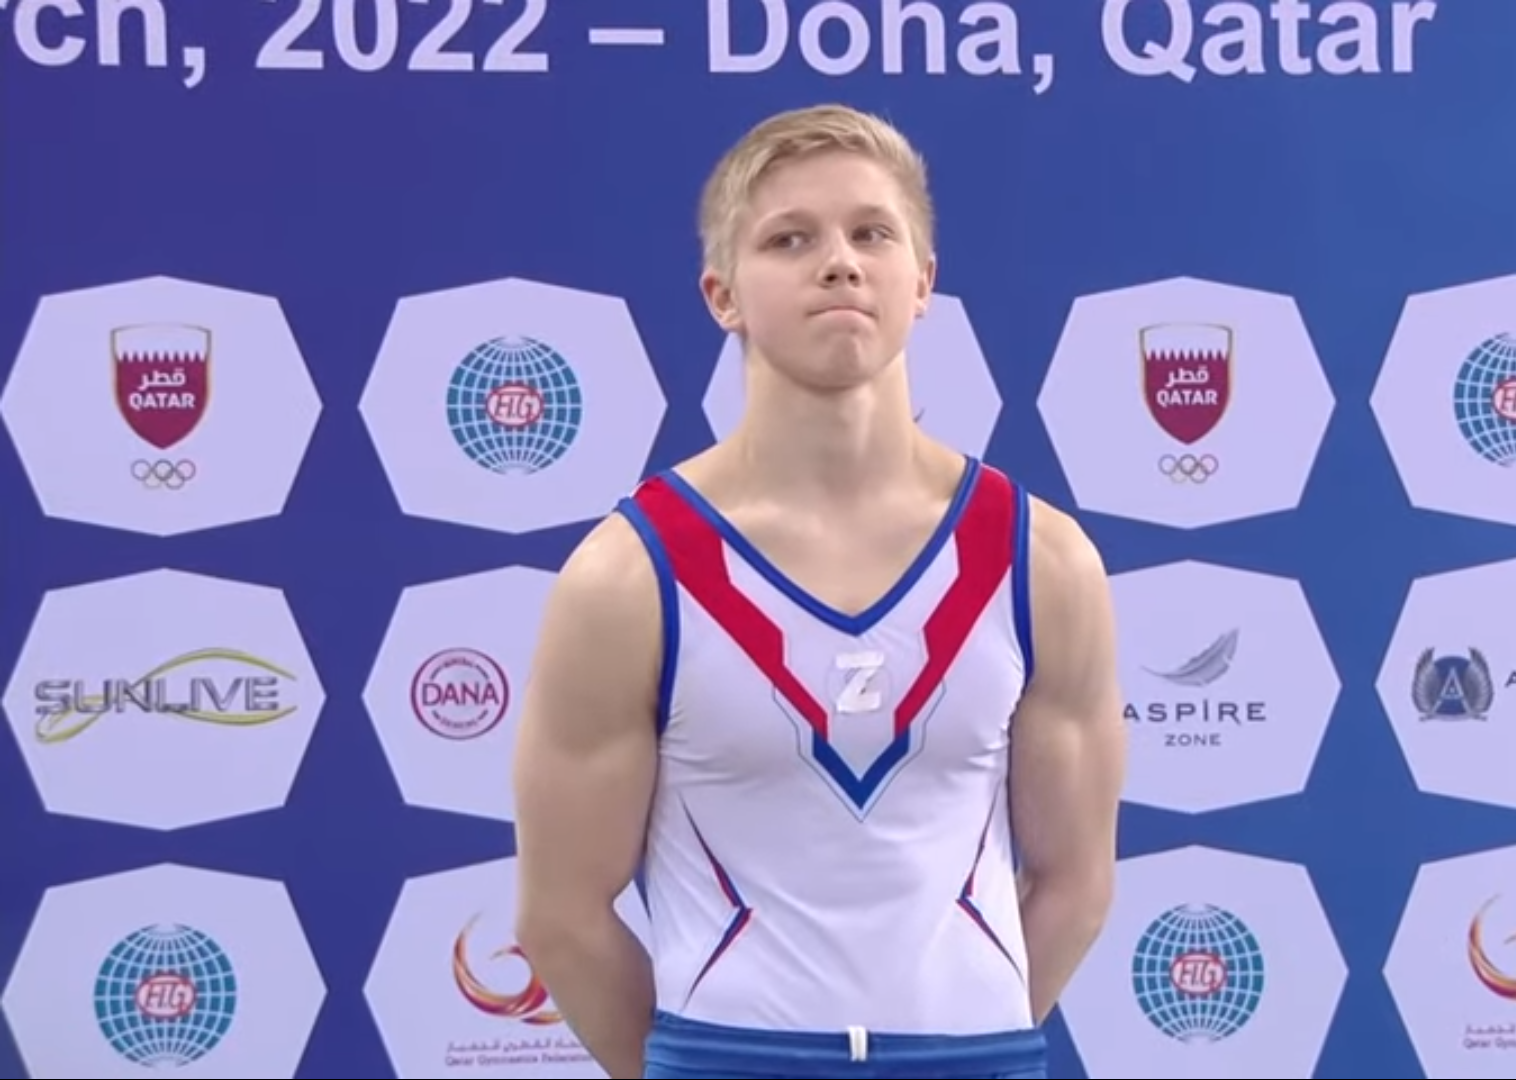 Ivan Kuliak has claimed a ban from gymnastics would be "unfair" ©YouTube